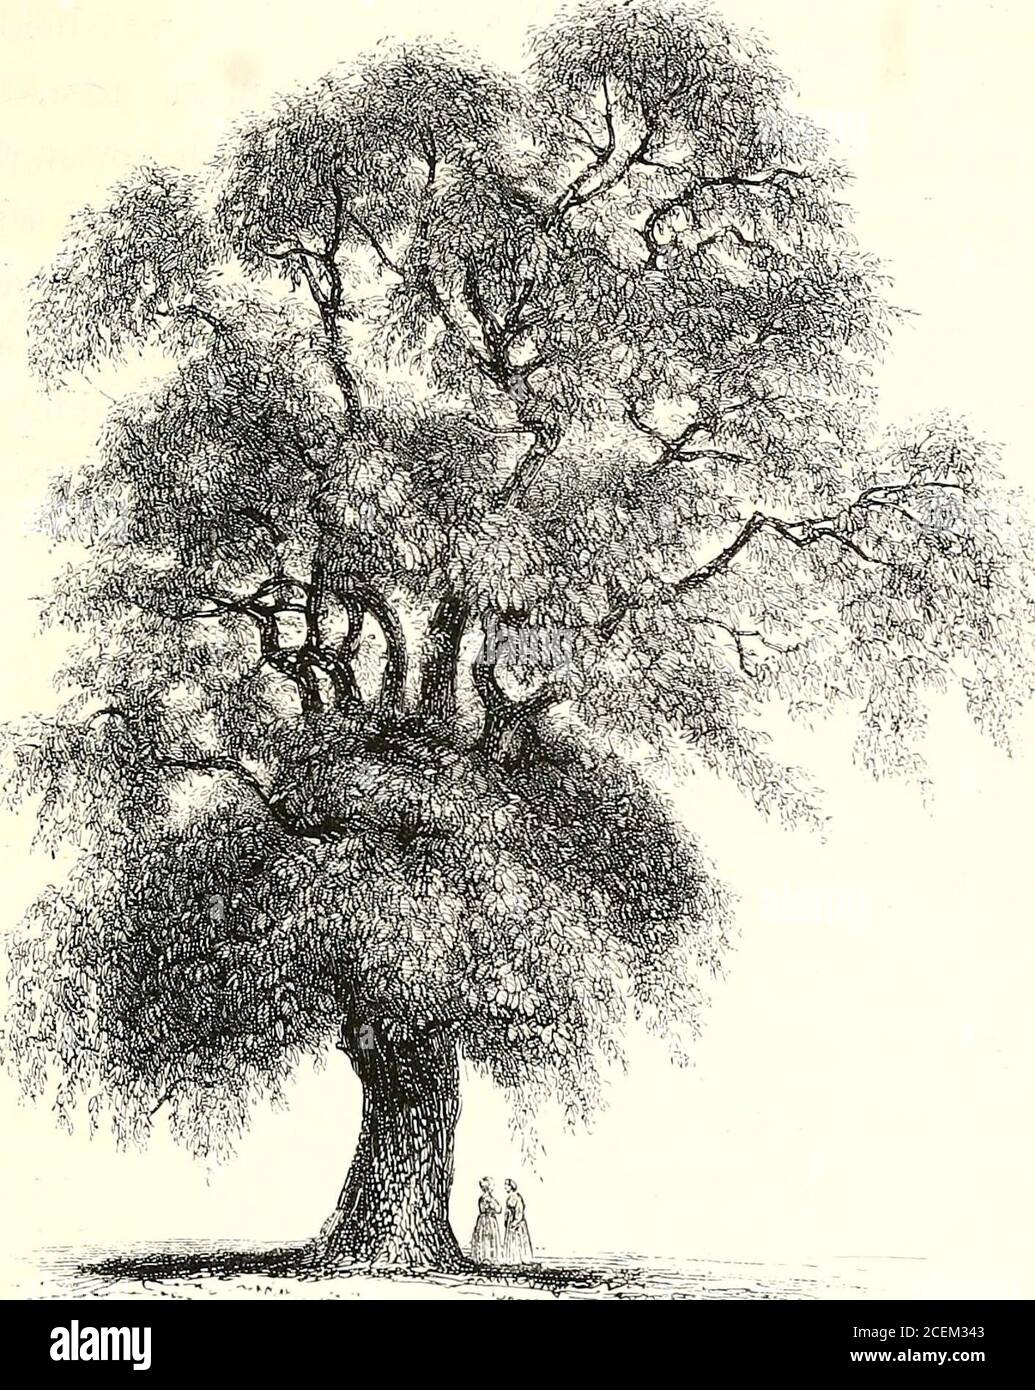 . A history of British forest-trees, indigenous and introduced. COMMON WALNUT. 139. Genus Juglans, Linn. Nat. Orel. Juglcmdacea. Juglans Regia, Linn.COMMON WALNUT. Linn. Si/st. MonoedaPolyandria. Juglans regia Linn. Hort. Cliff, p. 449.Will, sp. pi. iv. p. 455.Michaux, N. Amer. Syl. i. p. 143.Loudons Arb. Brit. ch. cii. p. 1423. Nux juglans seu regia vulgaris. Bauh Pin. 417. 140 JUGLANDACE.E. Previous to the introduction of the mahogany and otherbeautiful exotic woods, that of the Walnut was held inhigher estimation than an} other European tree, andsupplied their place in the manufacture of th Stock Photo